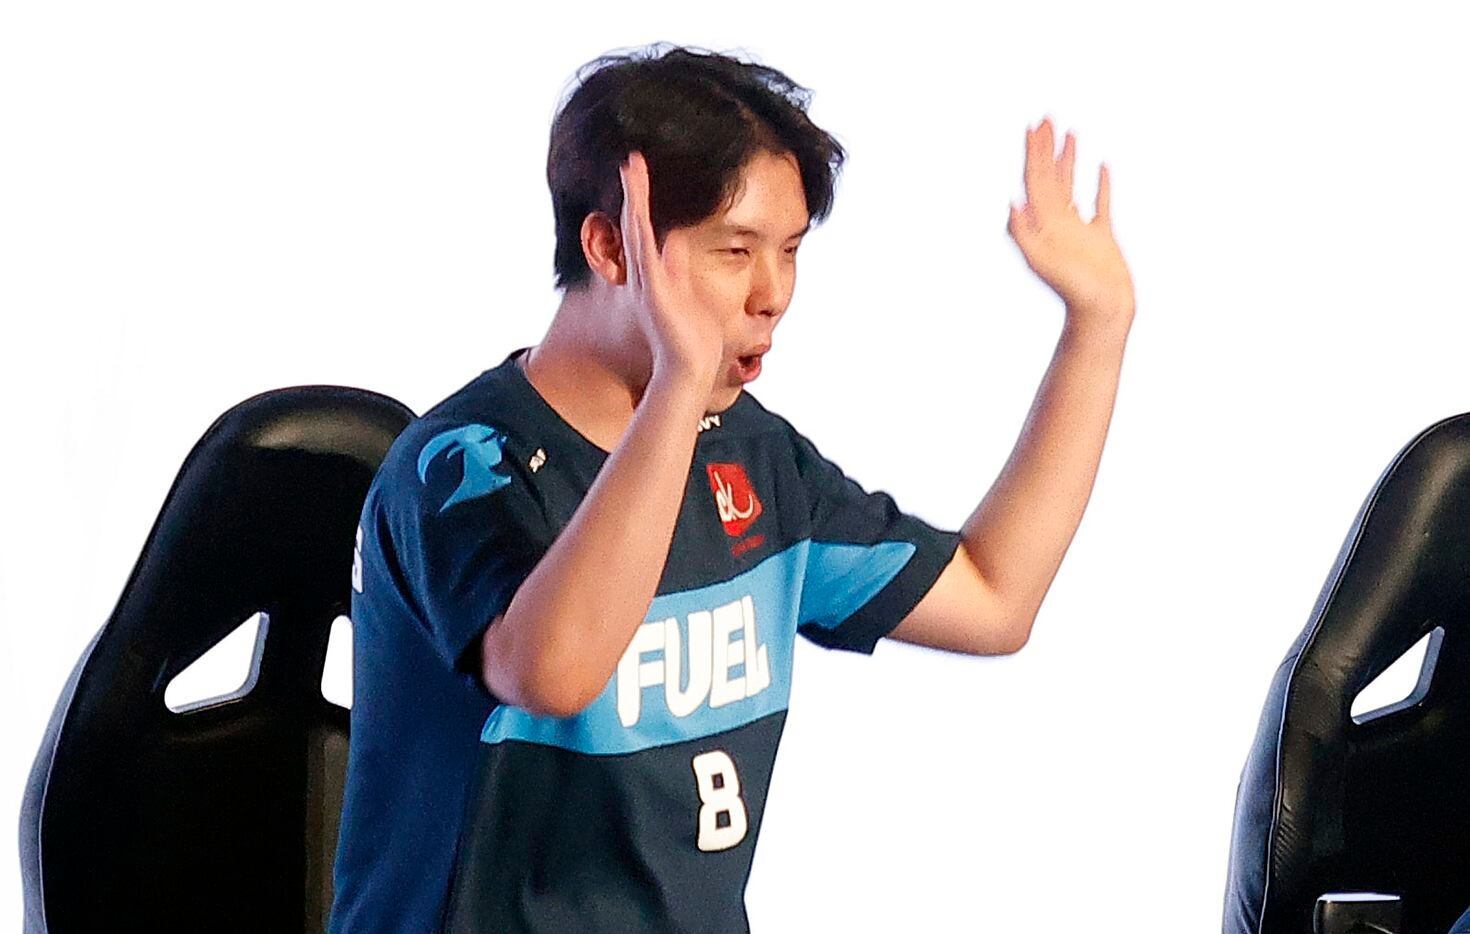 Dallas Fuel player Lee “Fearless” Eui-Seok celebrates after defeating the Houston Outlaws in...